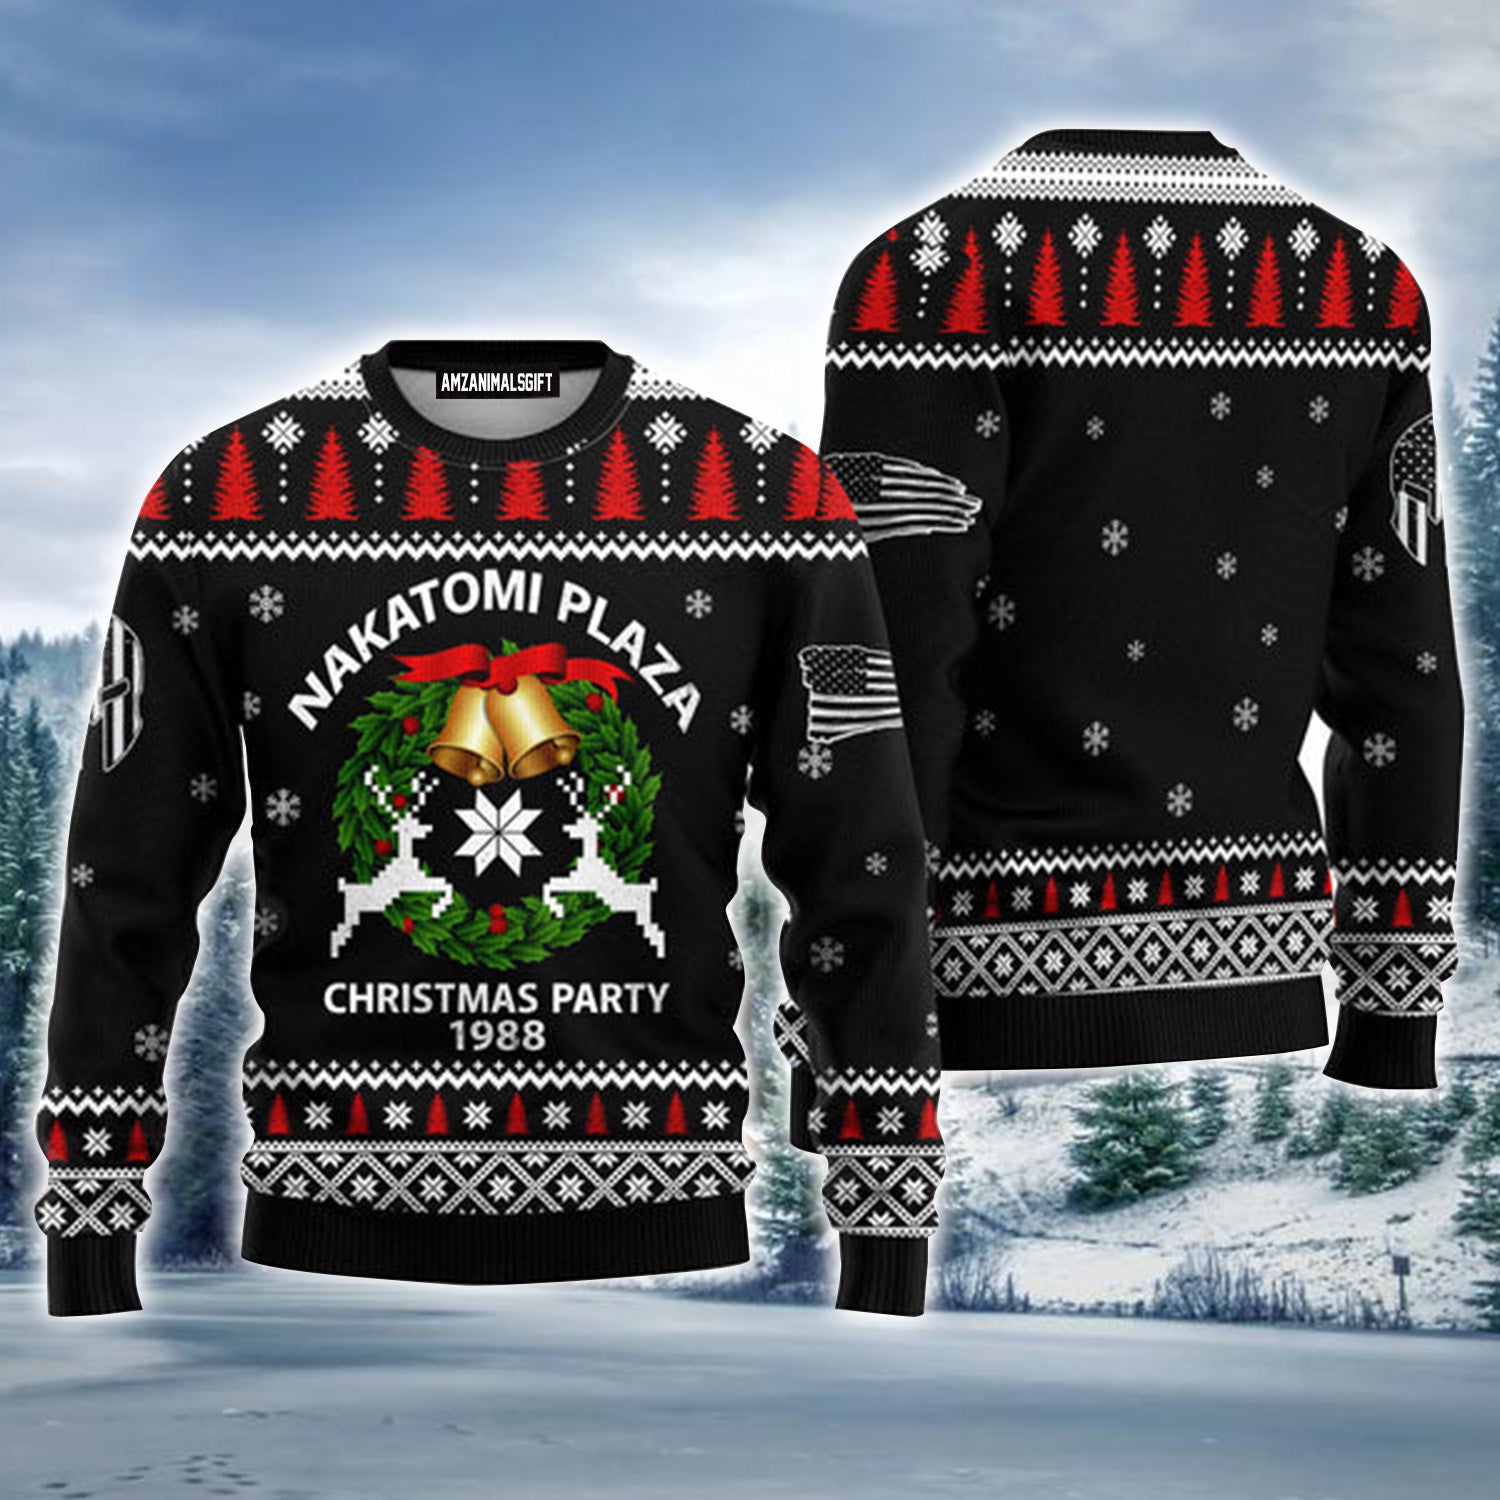 Warrior Nakatomi Plaza Black Urly Christmas Sweater, Christmas Party 1988 Sweater For Men & Women - Perfect Gift For Christmas, Family, Friends